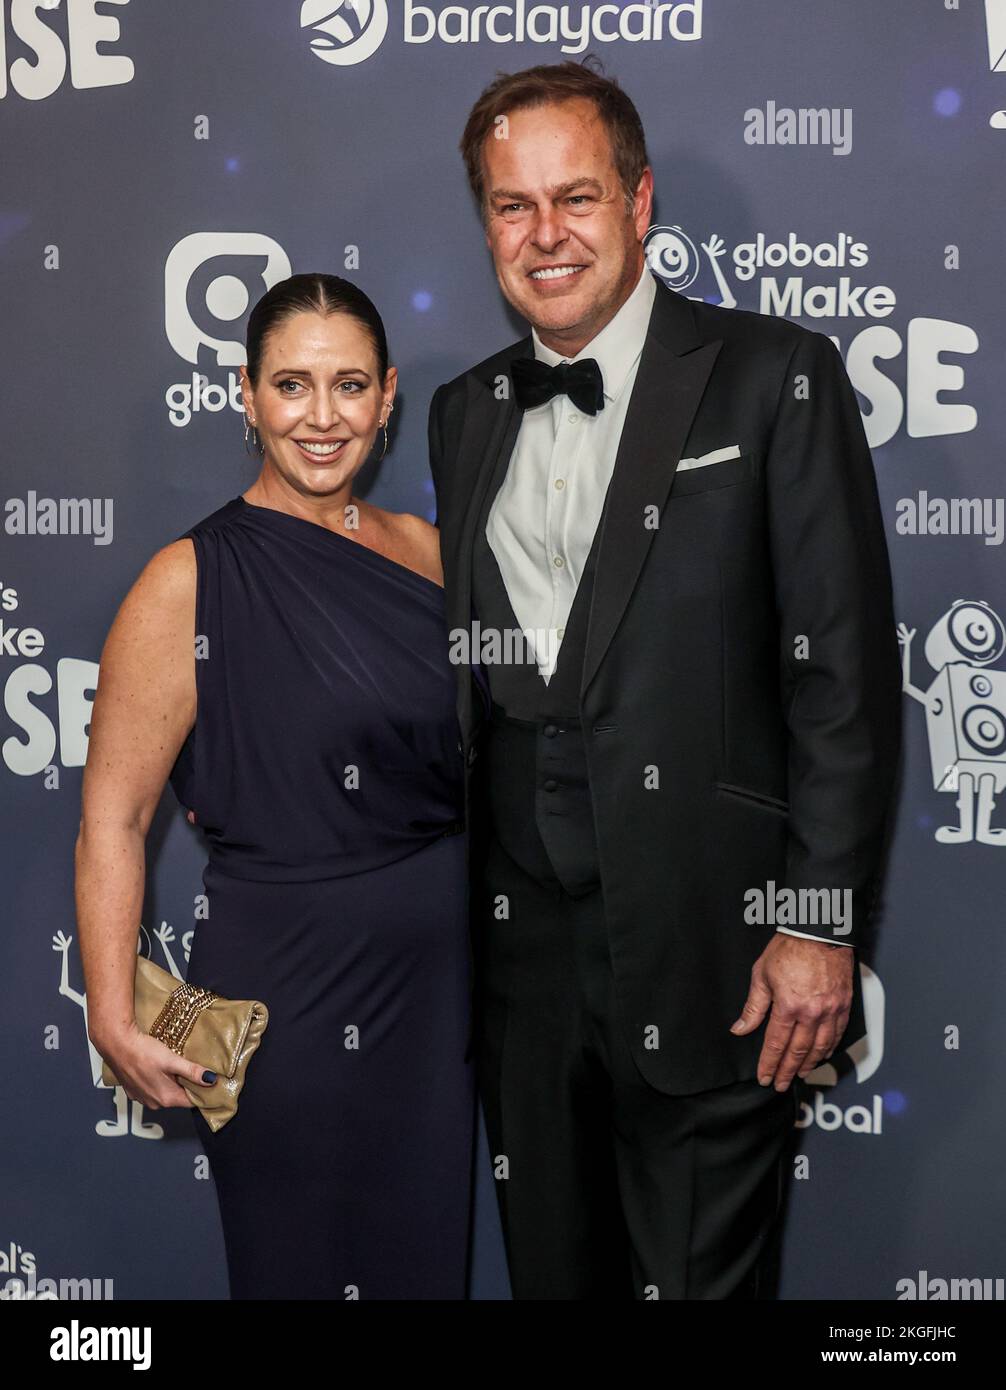 London, UK. 22nd Nov, 2022. Tara Capp and Peter Jones attend Global's Make Some Noise Night 2022 at The Londoner Hotel in London. Credit: SOPA Images Limited/Alamy Live News Stock Photo